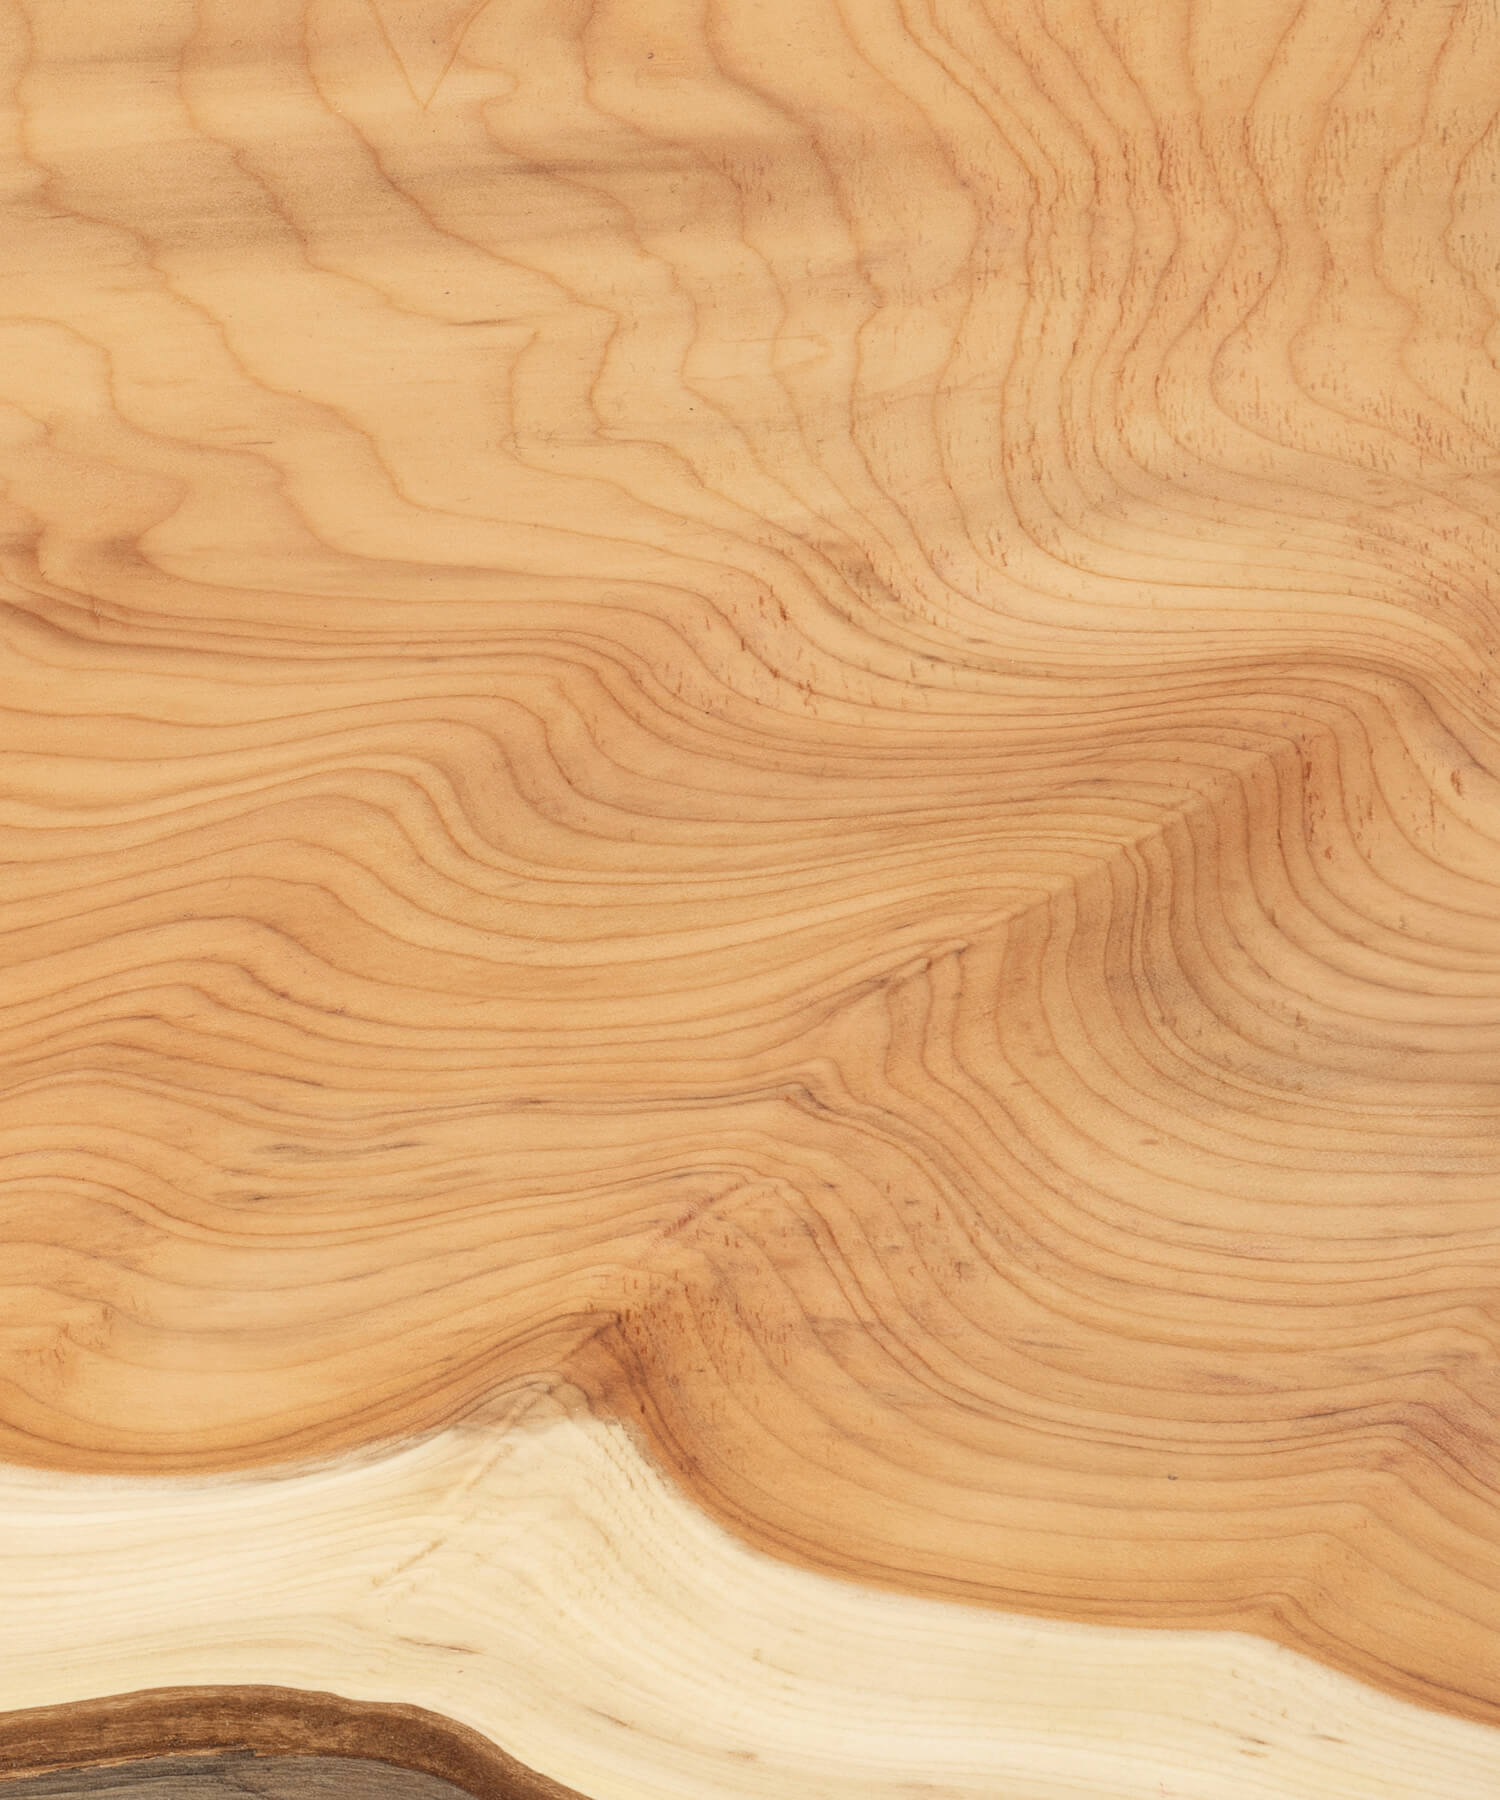 oiled yew timber grain close up